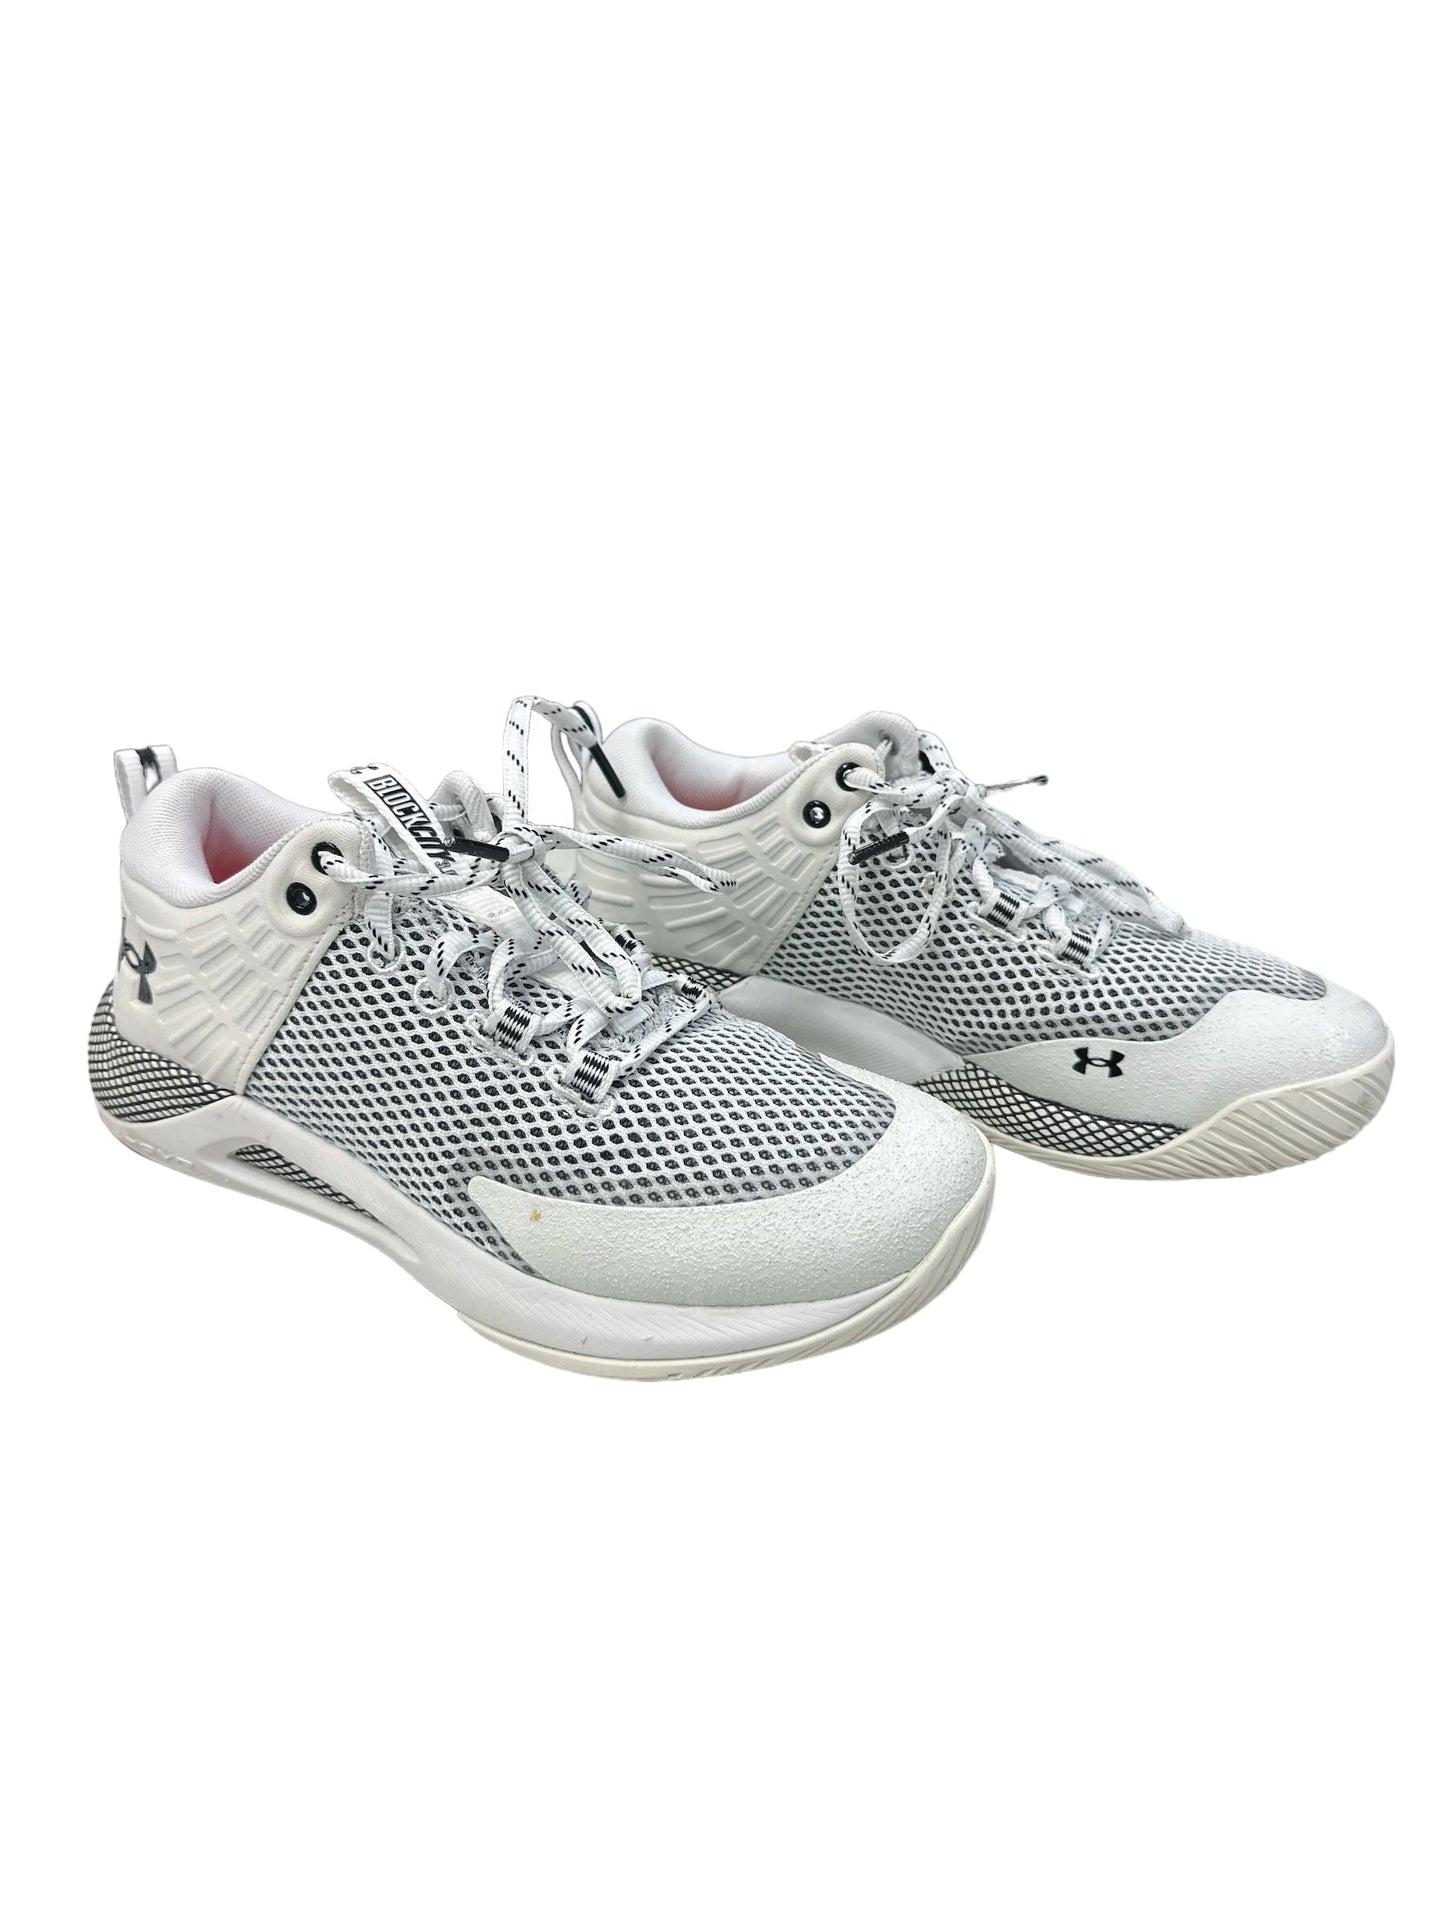 White Shoes Athletic Under Armour, Size 7